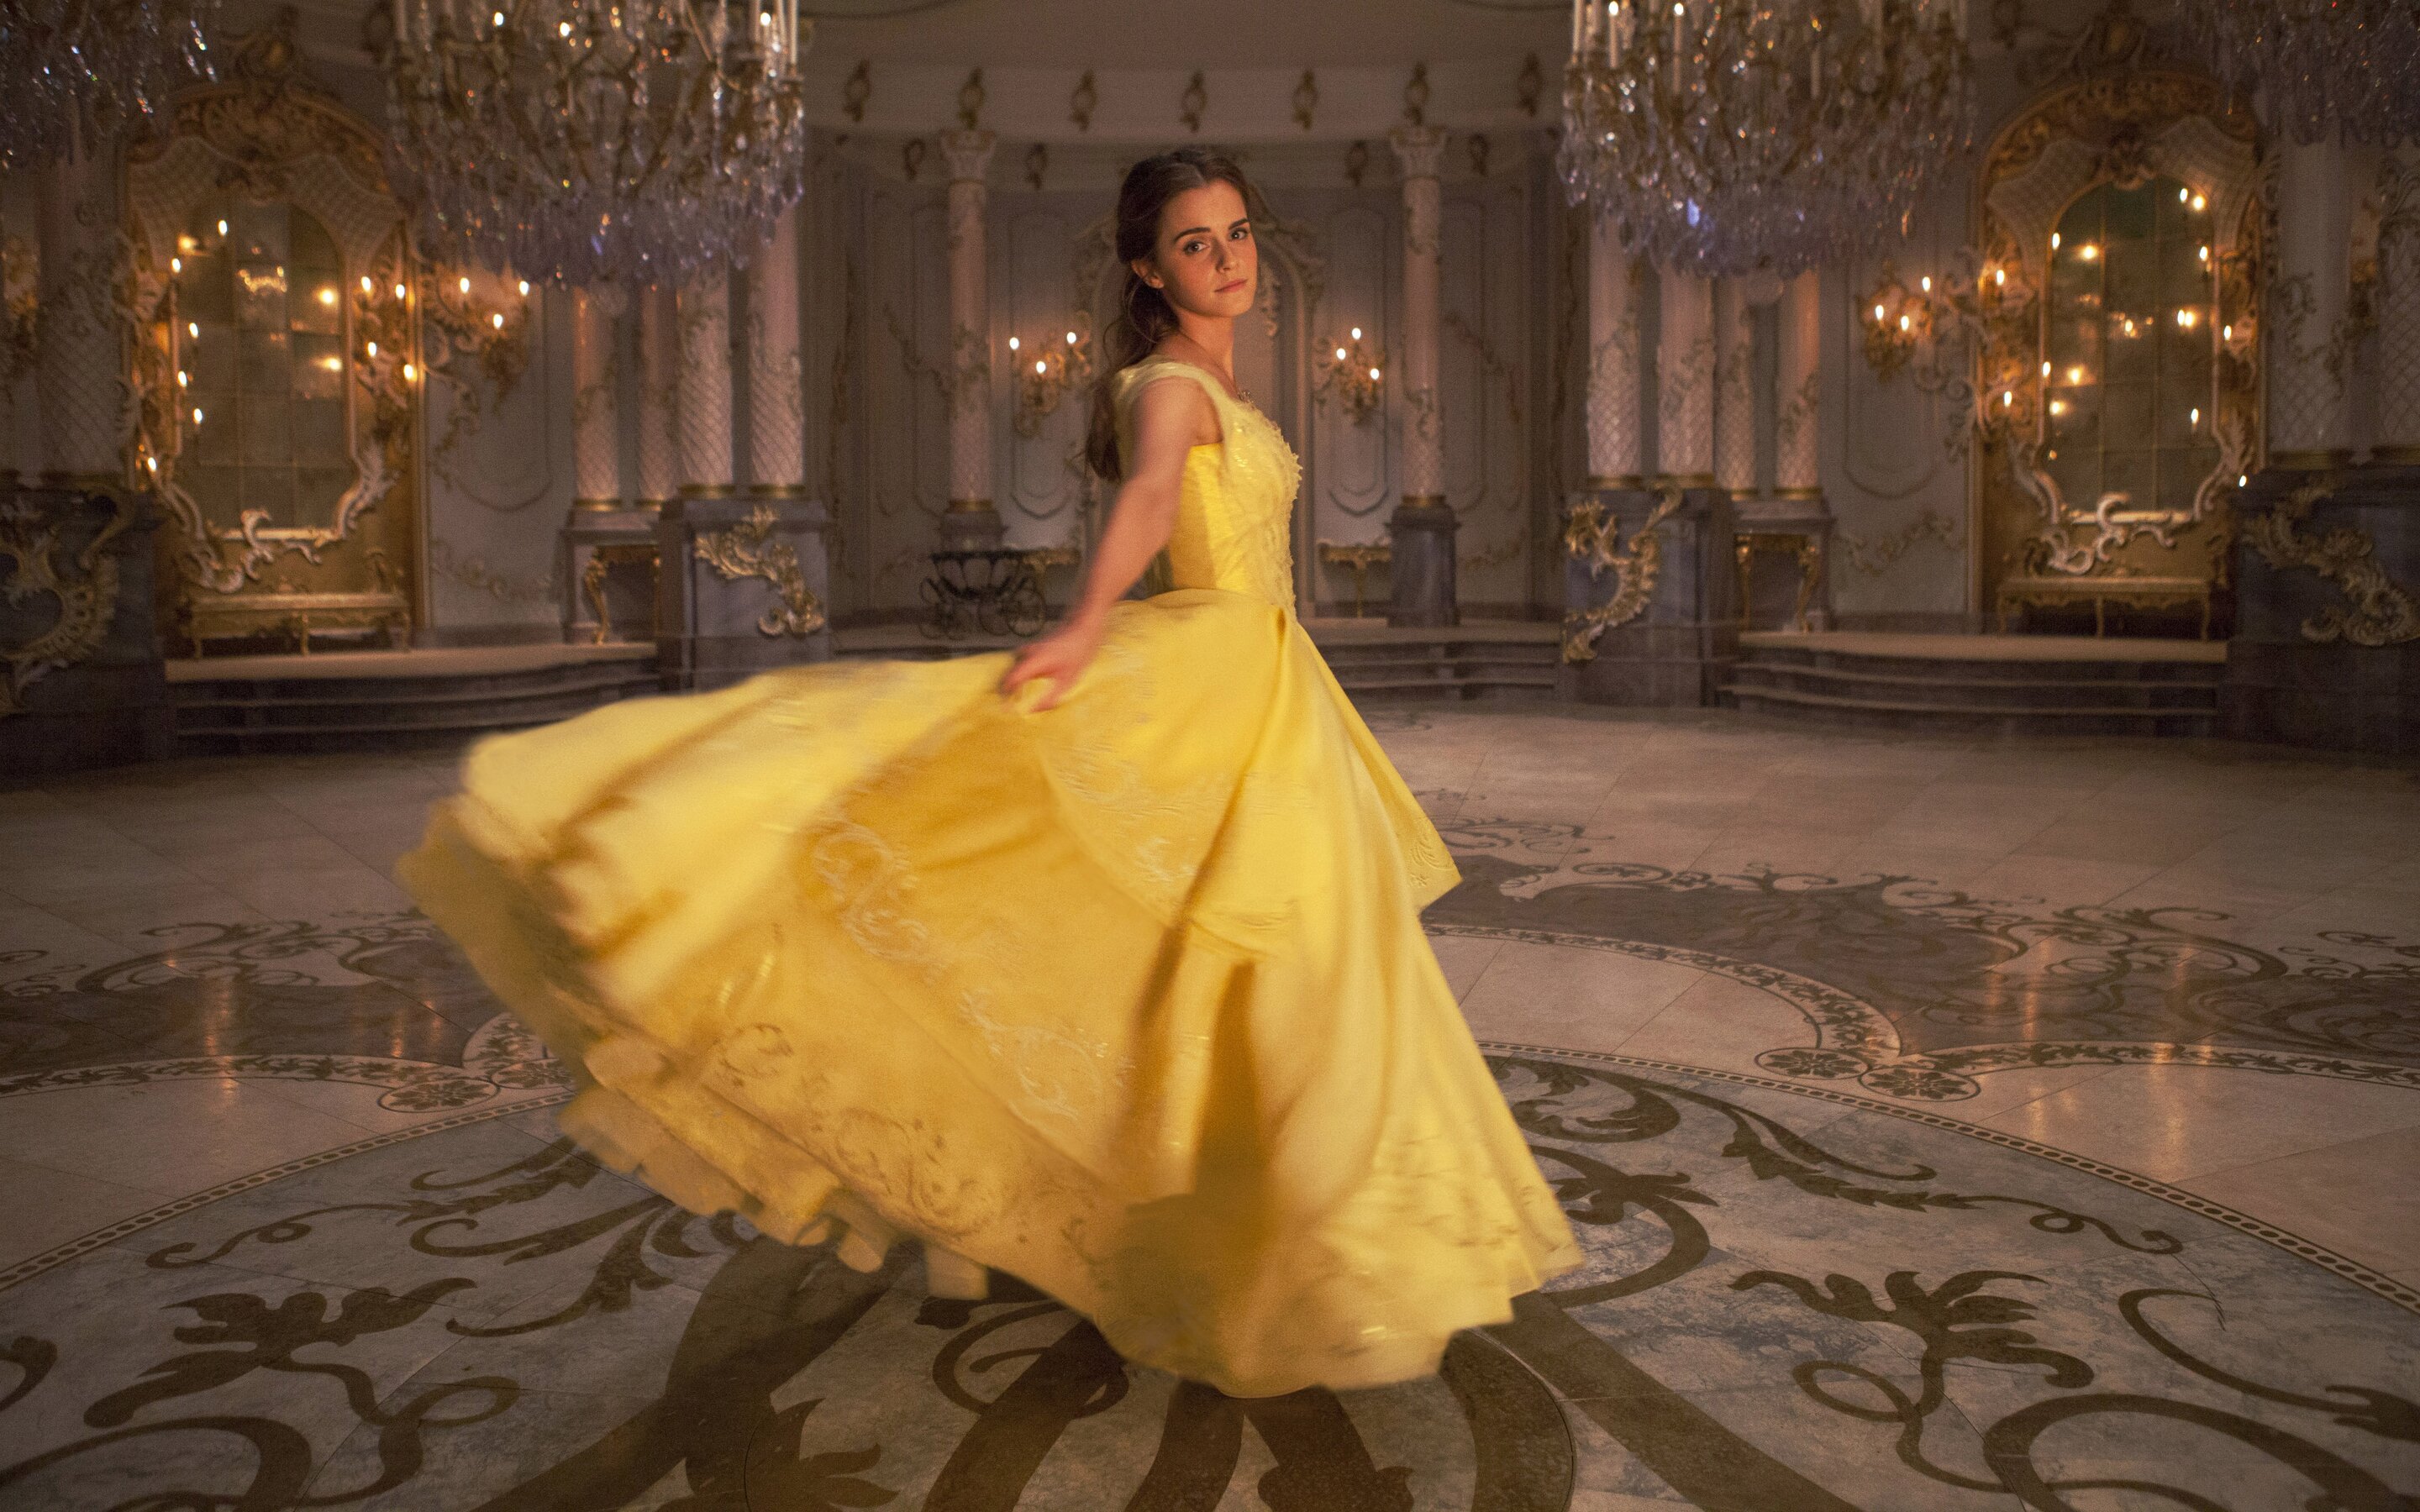 Beauty And The Beast Hd Film Online 2017 Movie